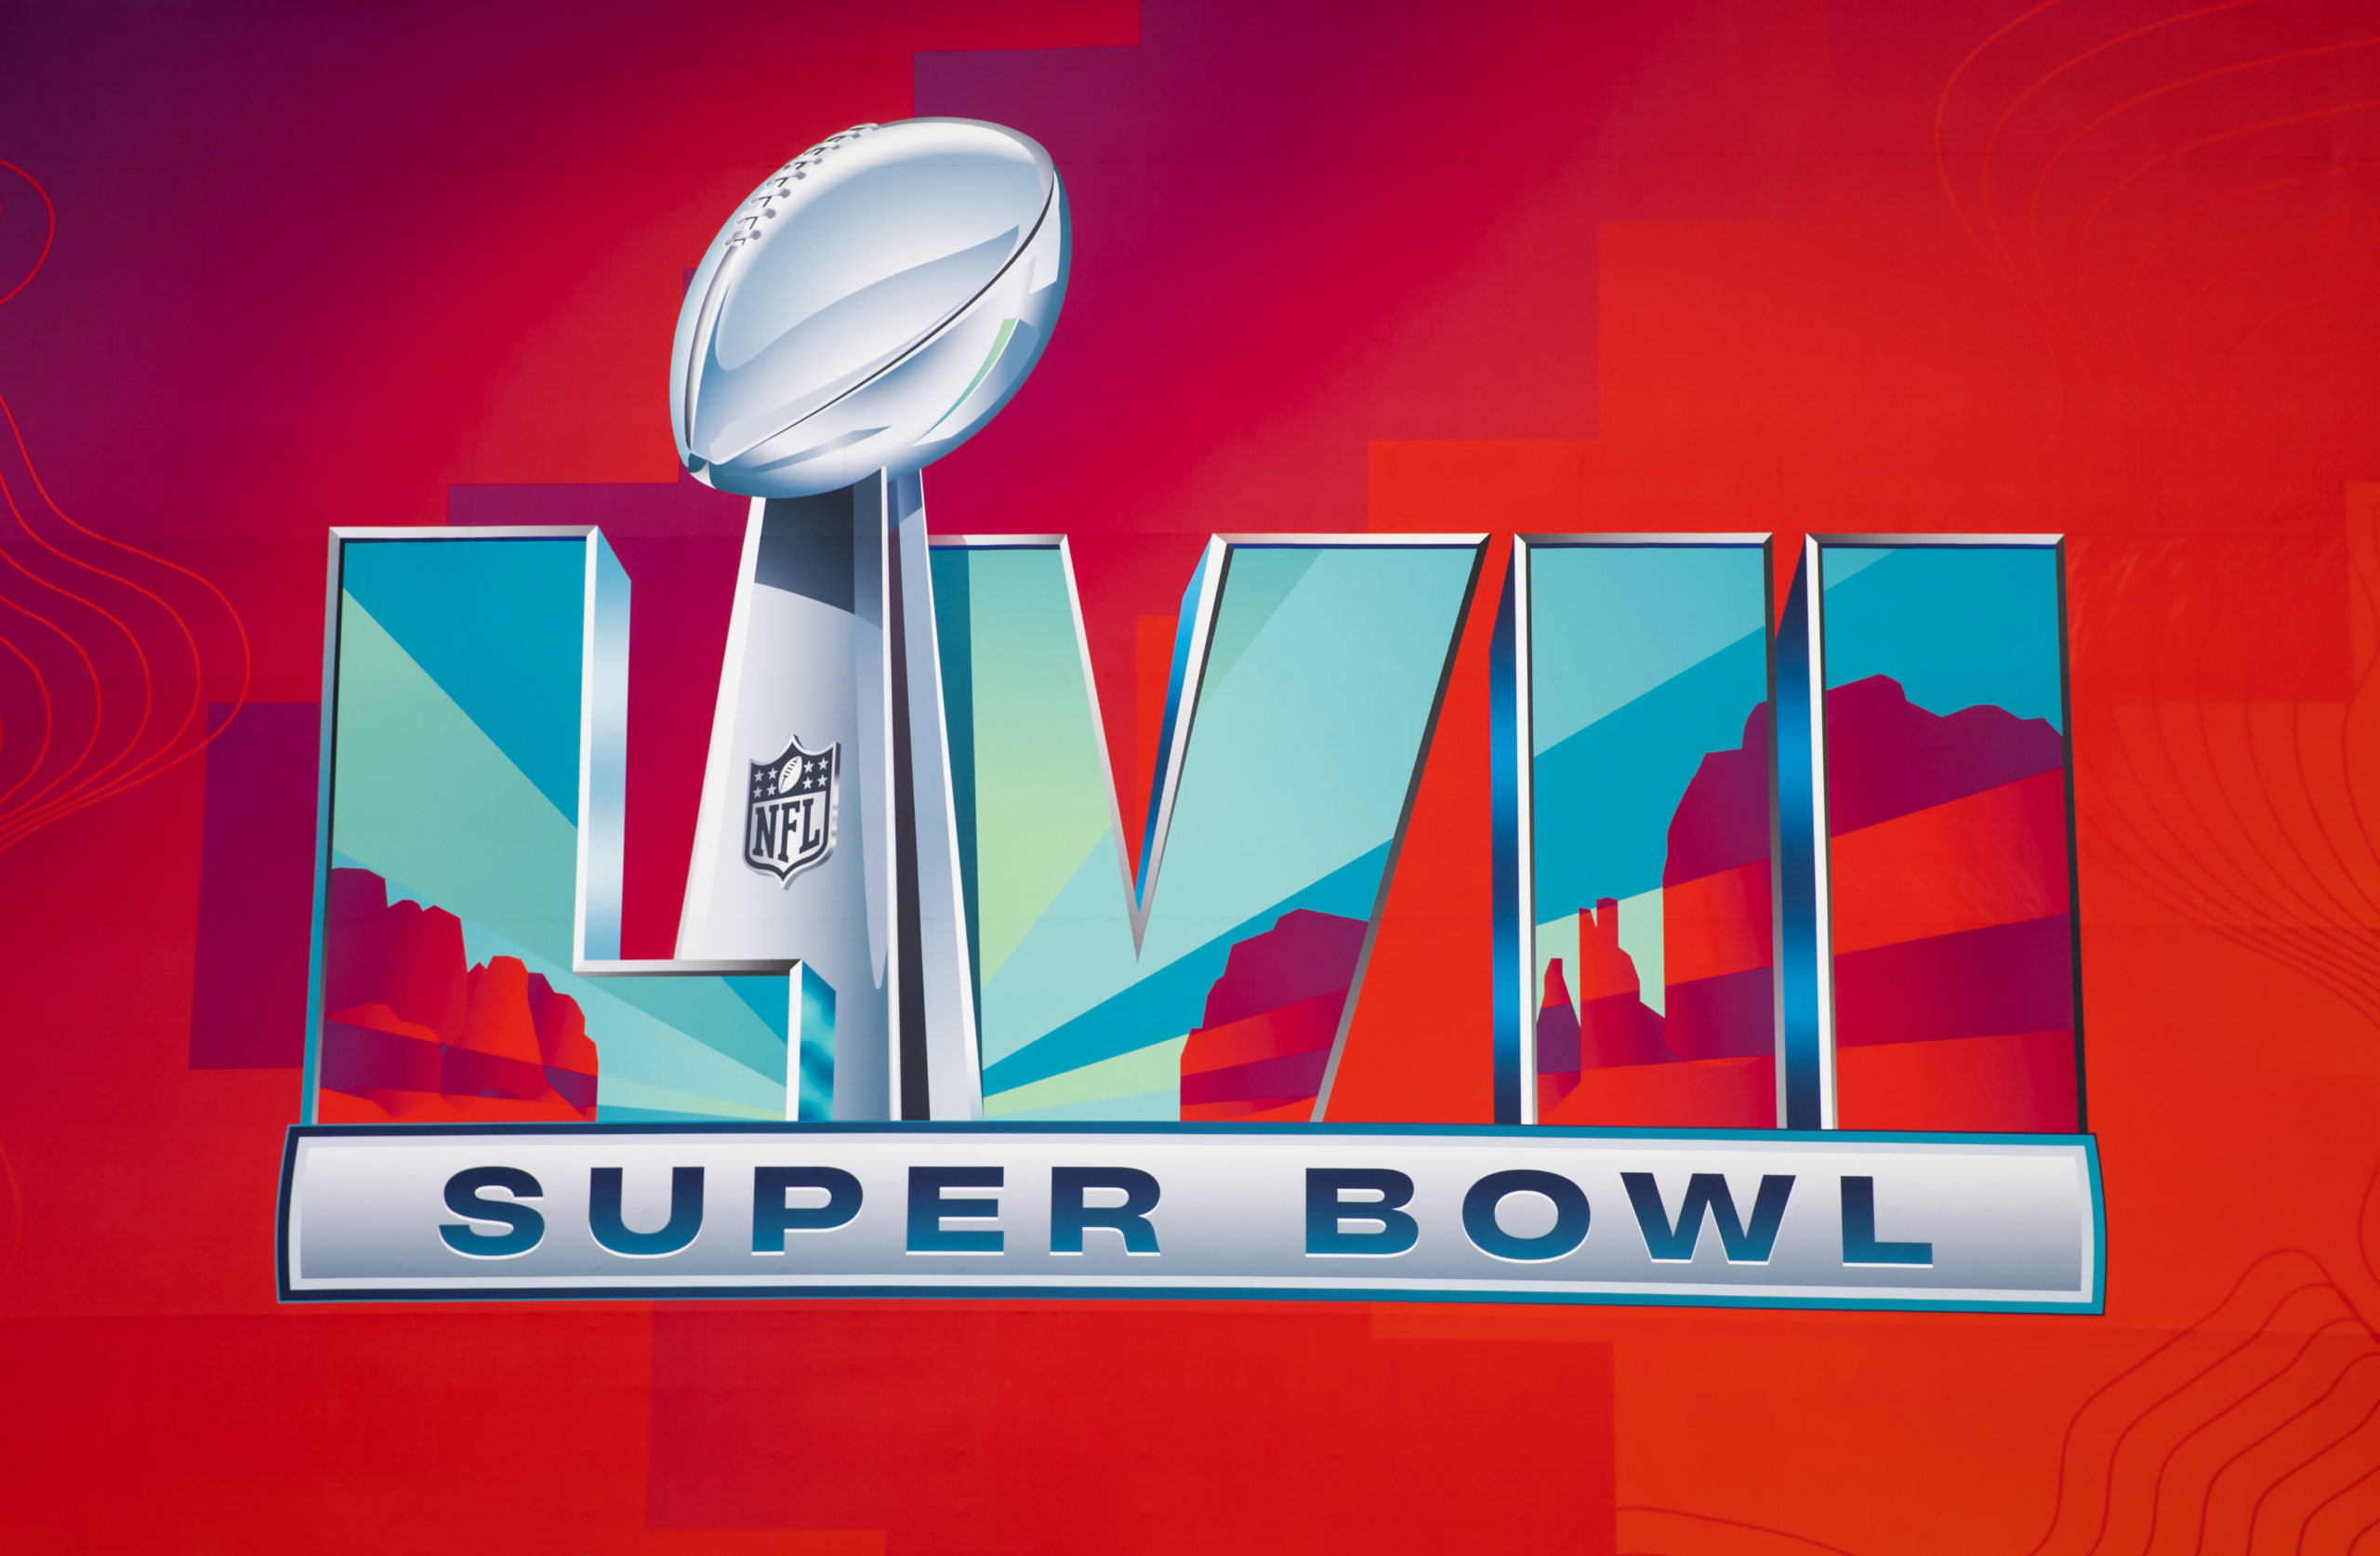 what time is the super bowl game on february 13th